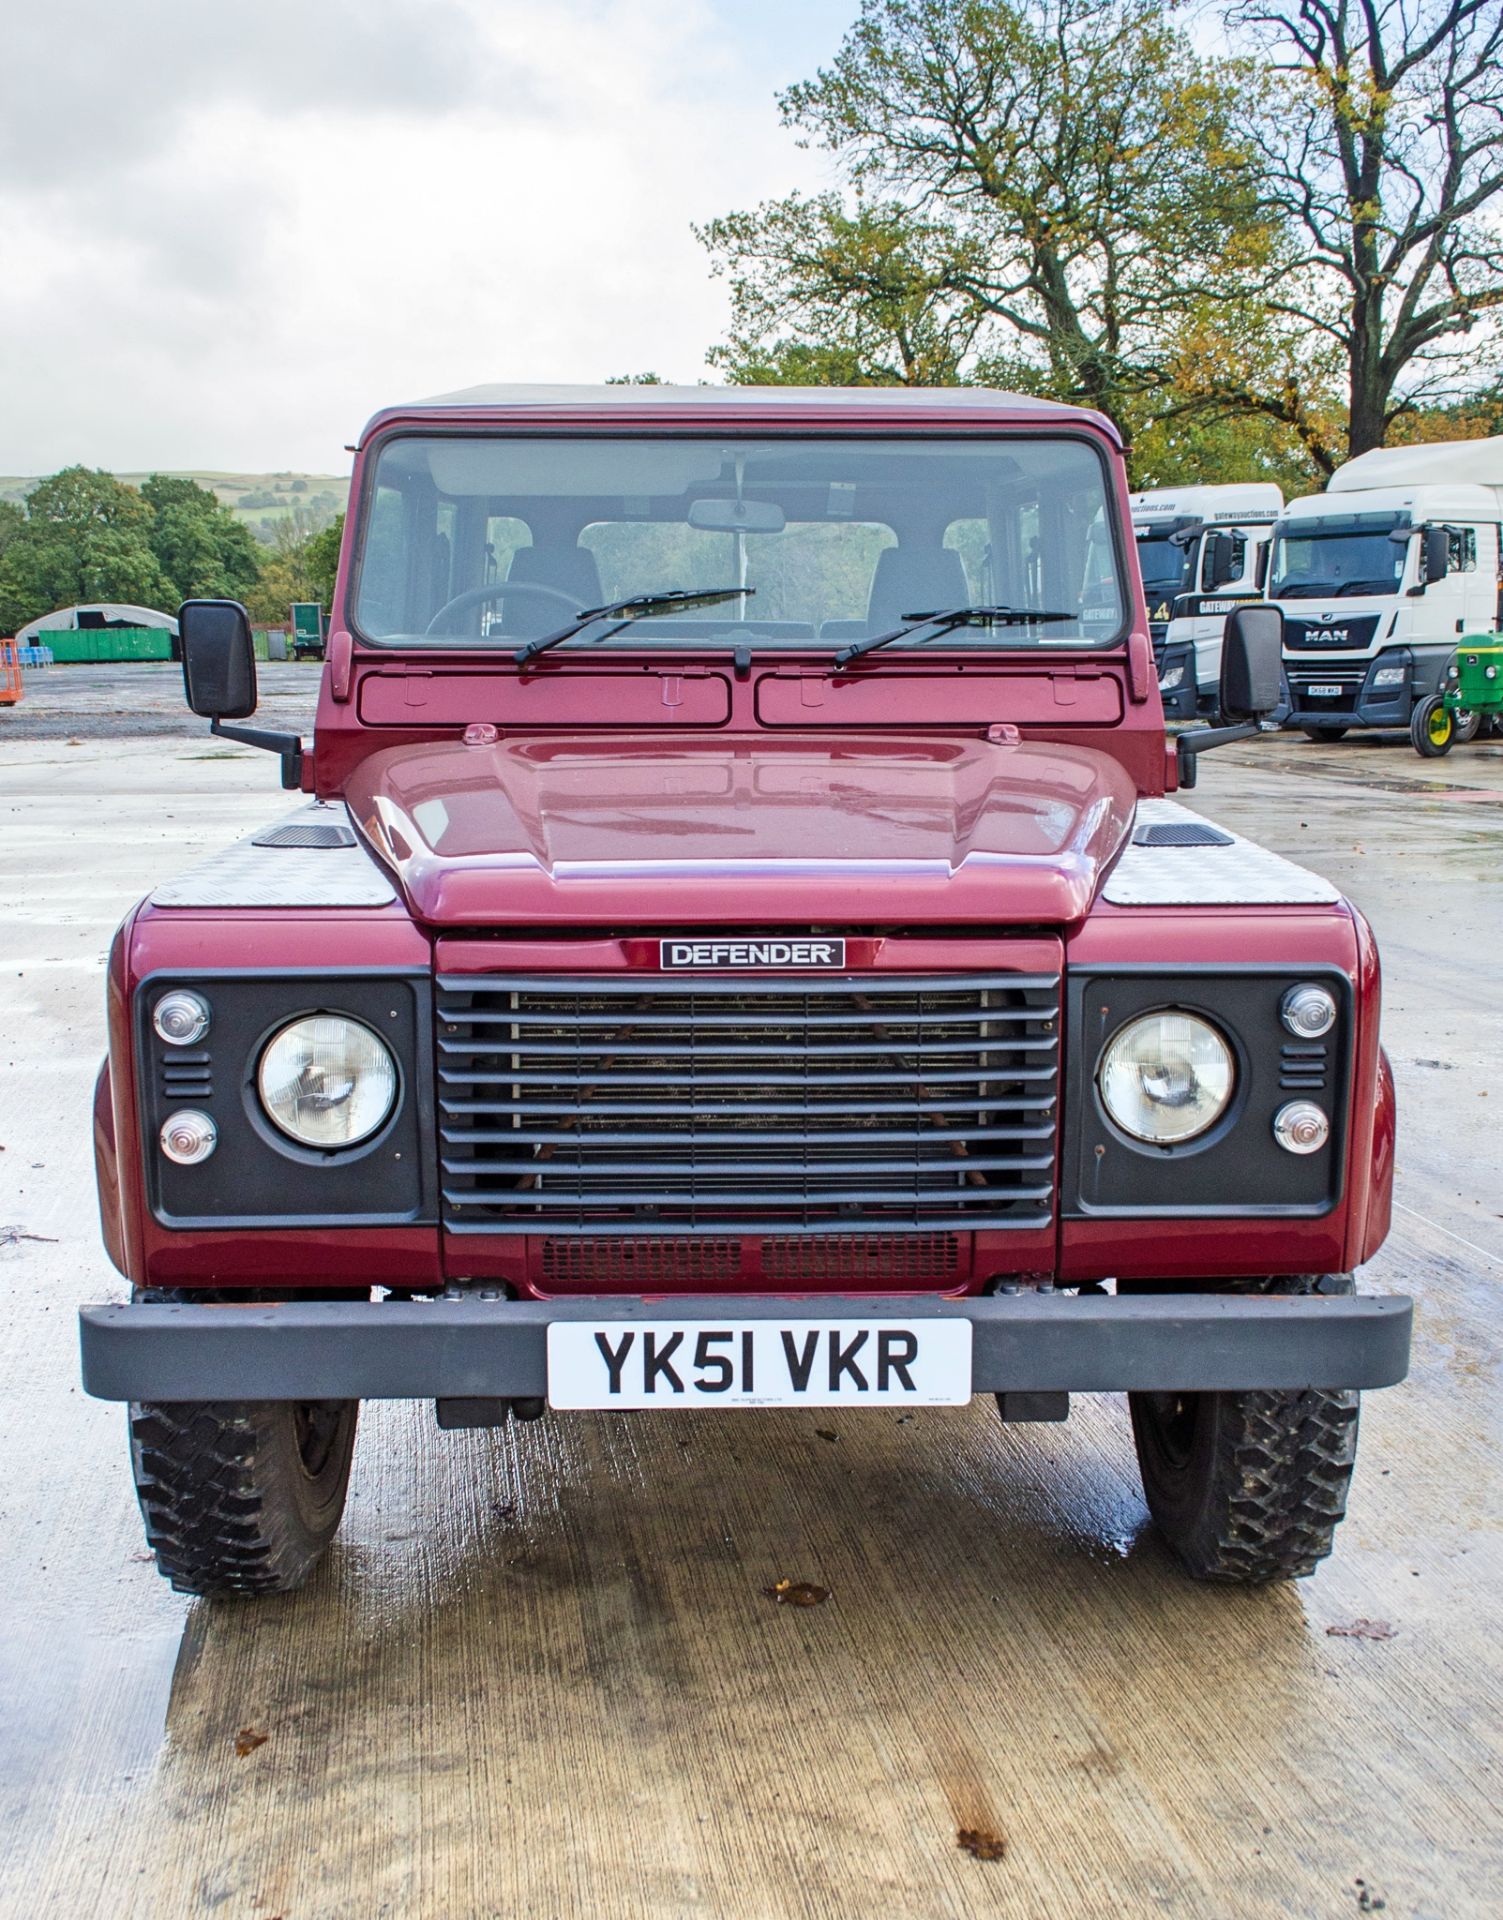 Land Rover Defender 110 County TD5 4x4 double cab pick up Registration Number: YK51 VKR Date of - Image 5 of 29